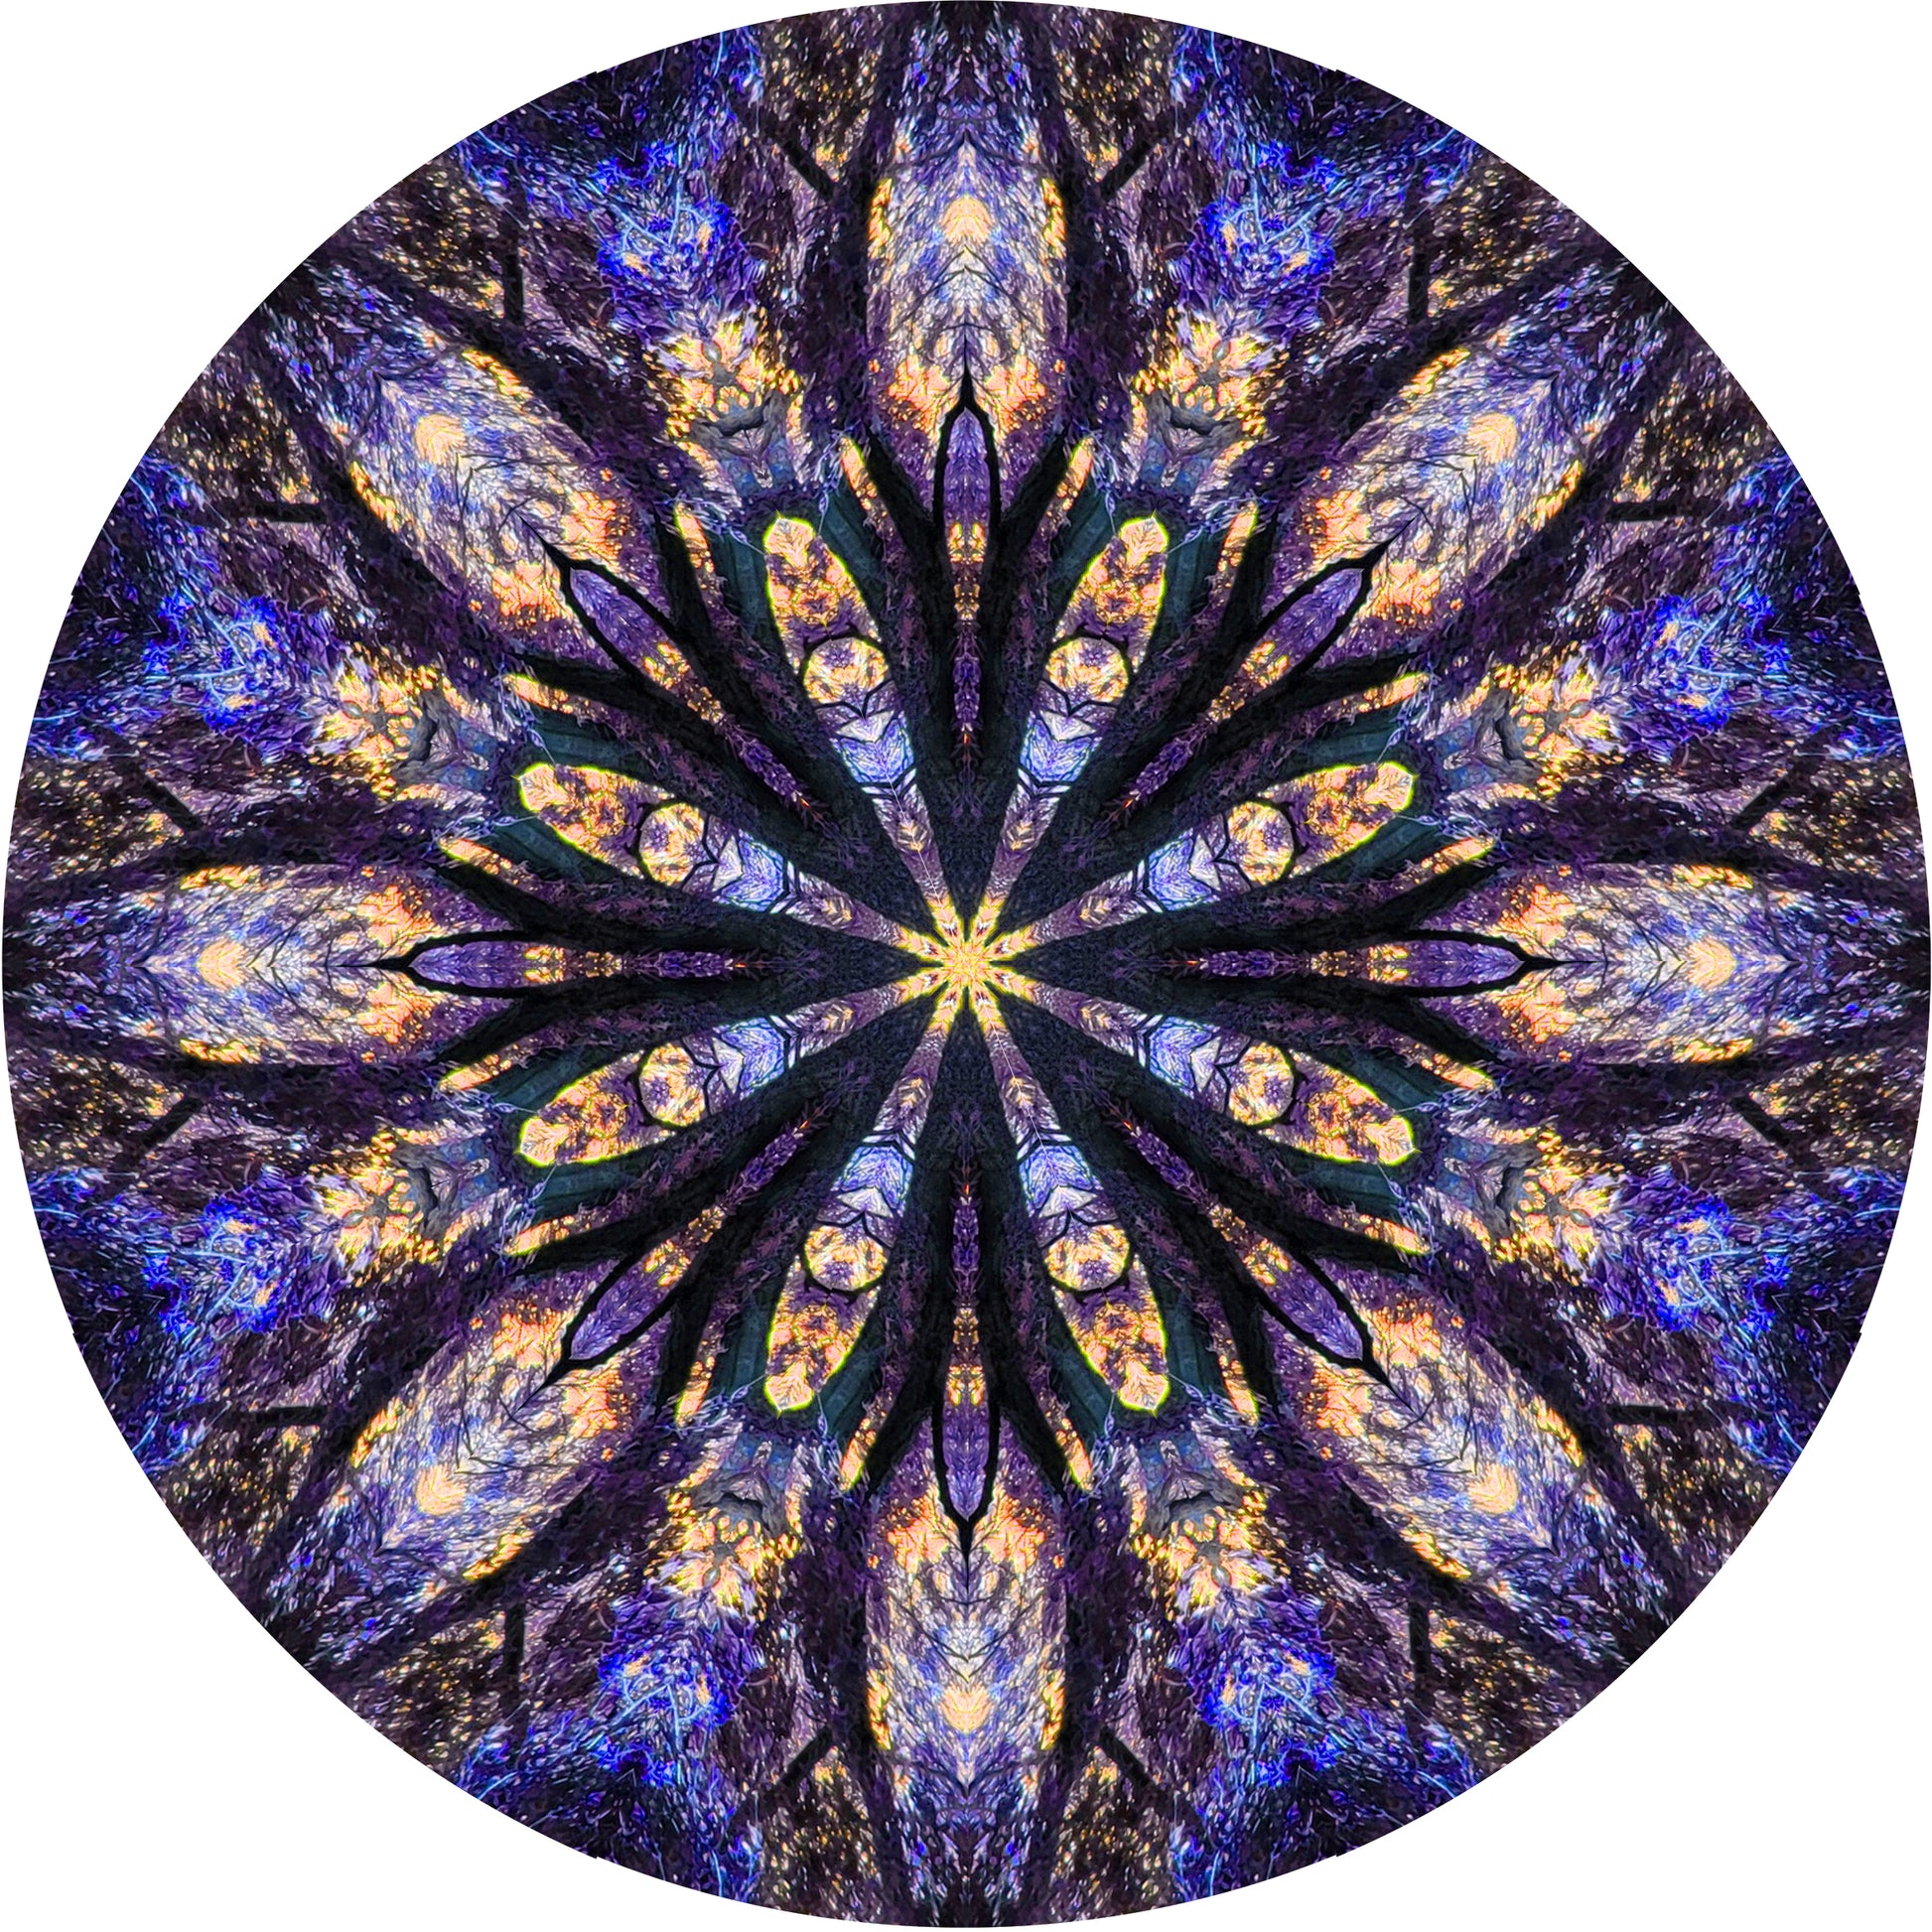 A mandala in bluey purple and pale orange, created from a photo of a tree. there are lots of fascinating details that look like tree sprites in the image